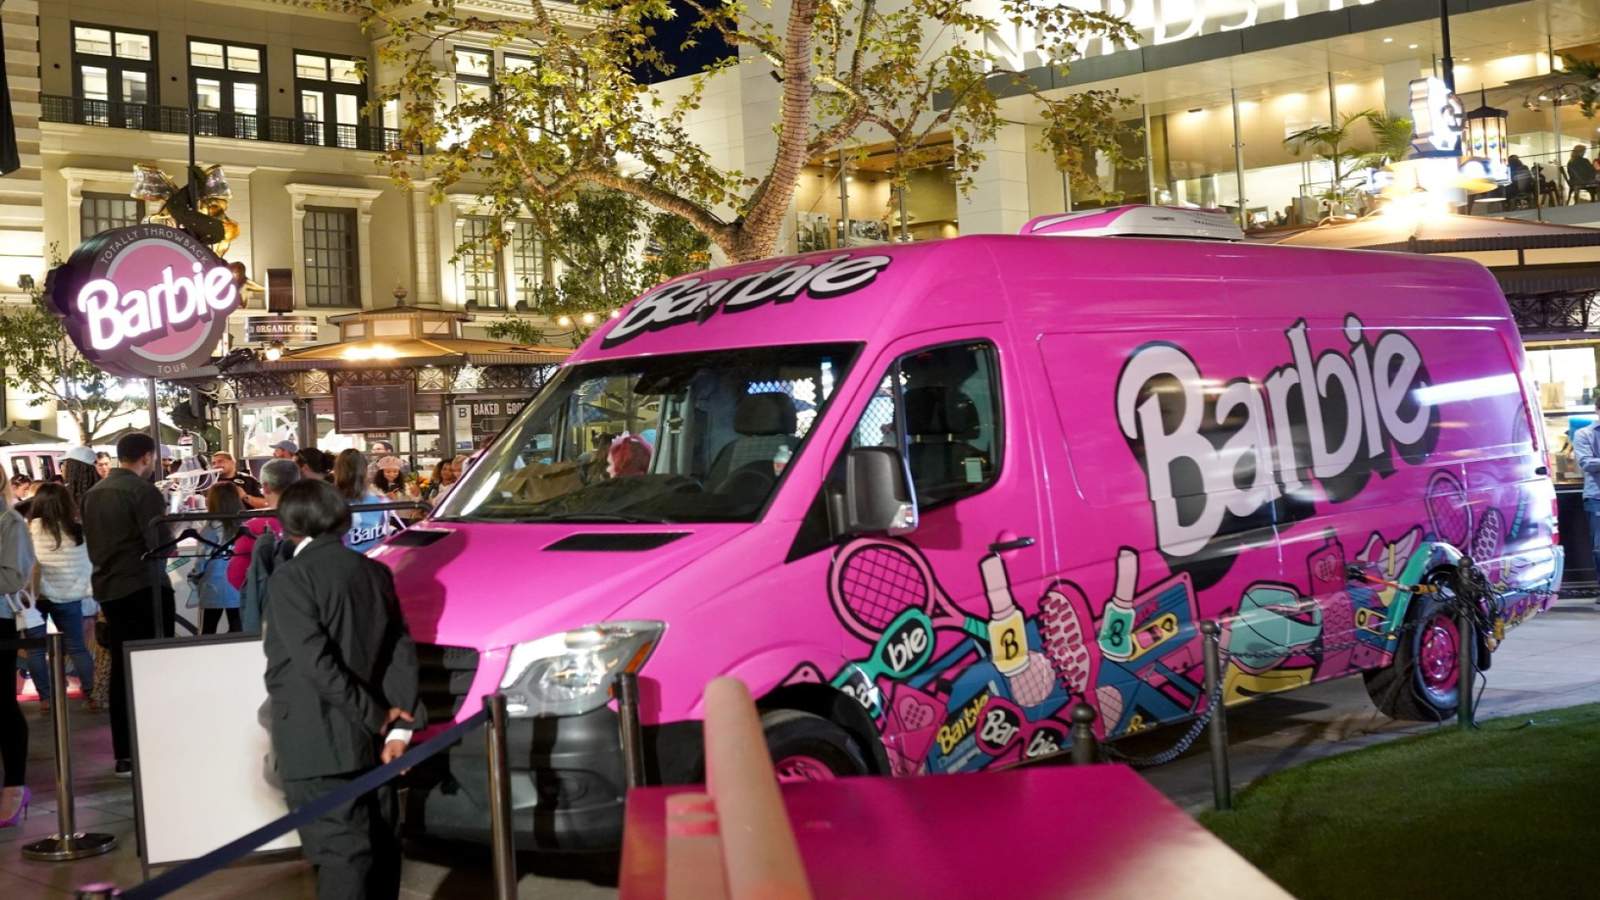 Barbie pop-up truck to stop at The Shops at La Cantera for one day only